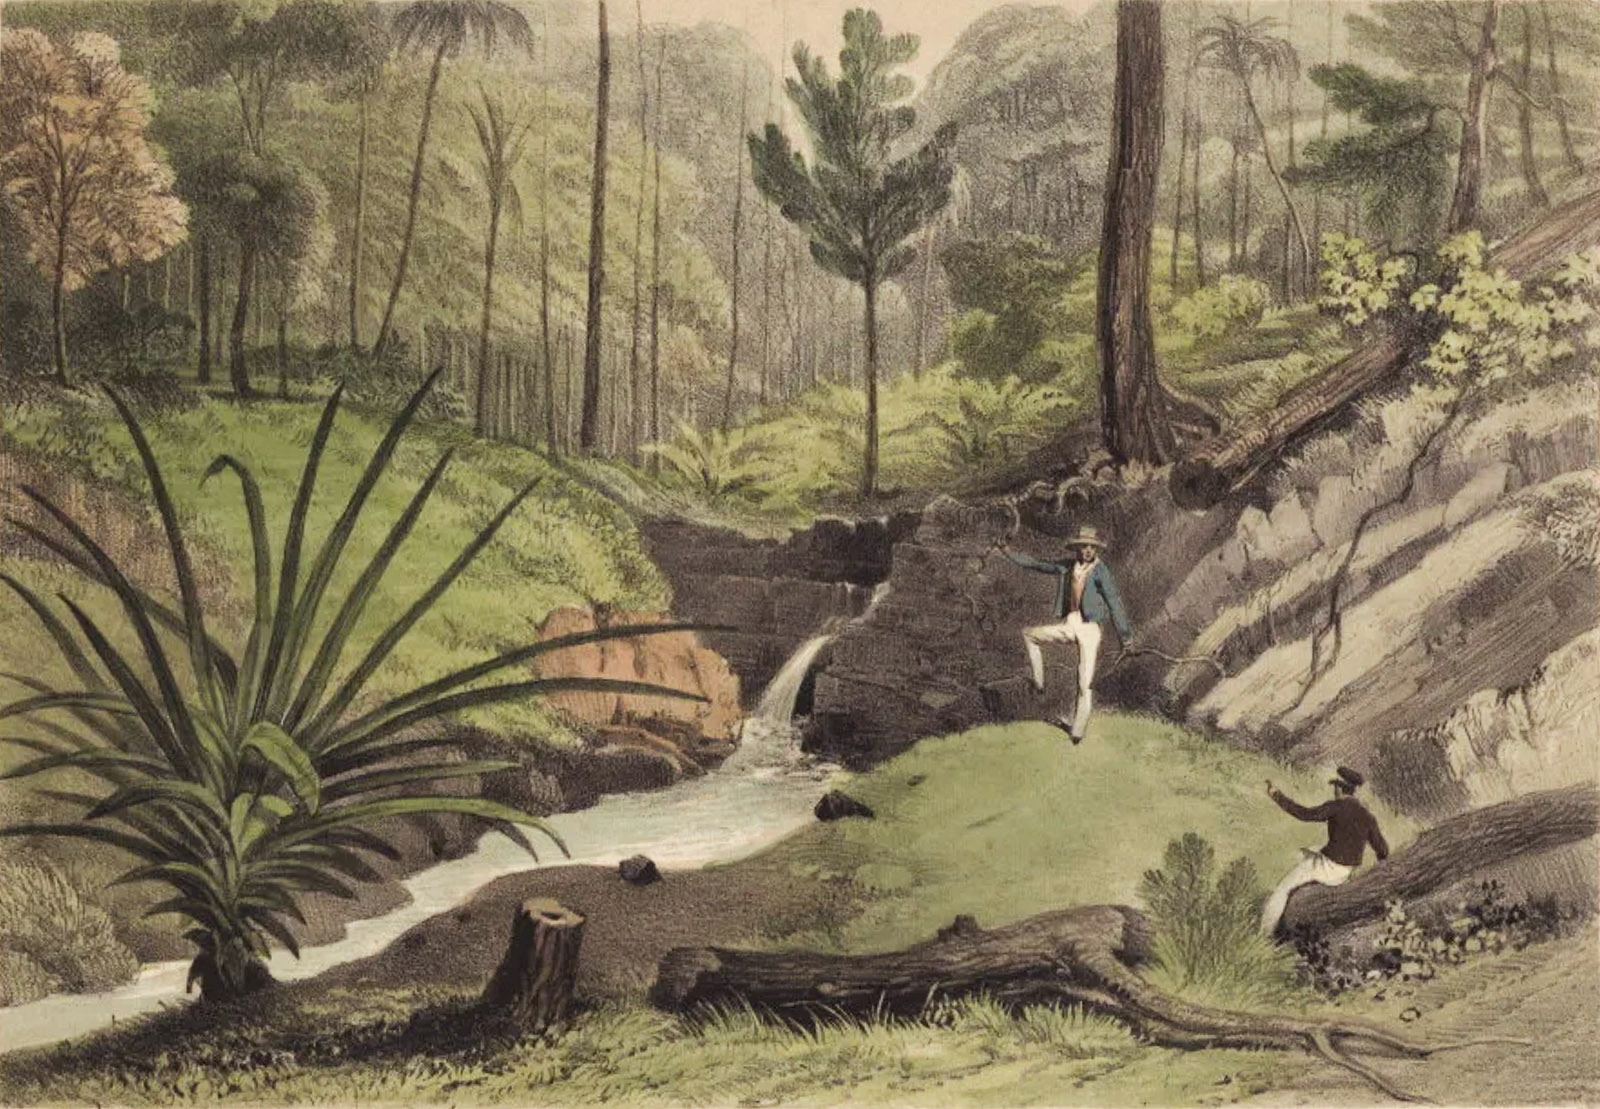 ‘View of a Coal Seam on the Island of Labuan’; lithograph from the book Views in the Eastern Archipelago